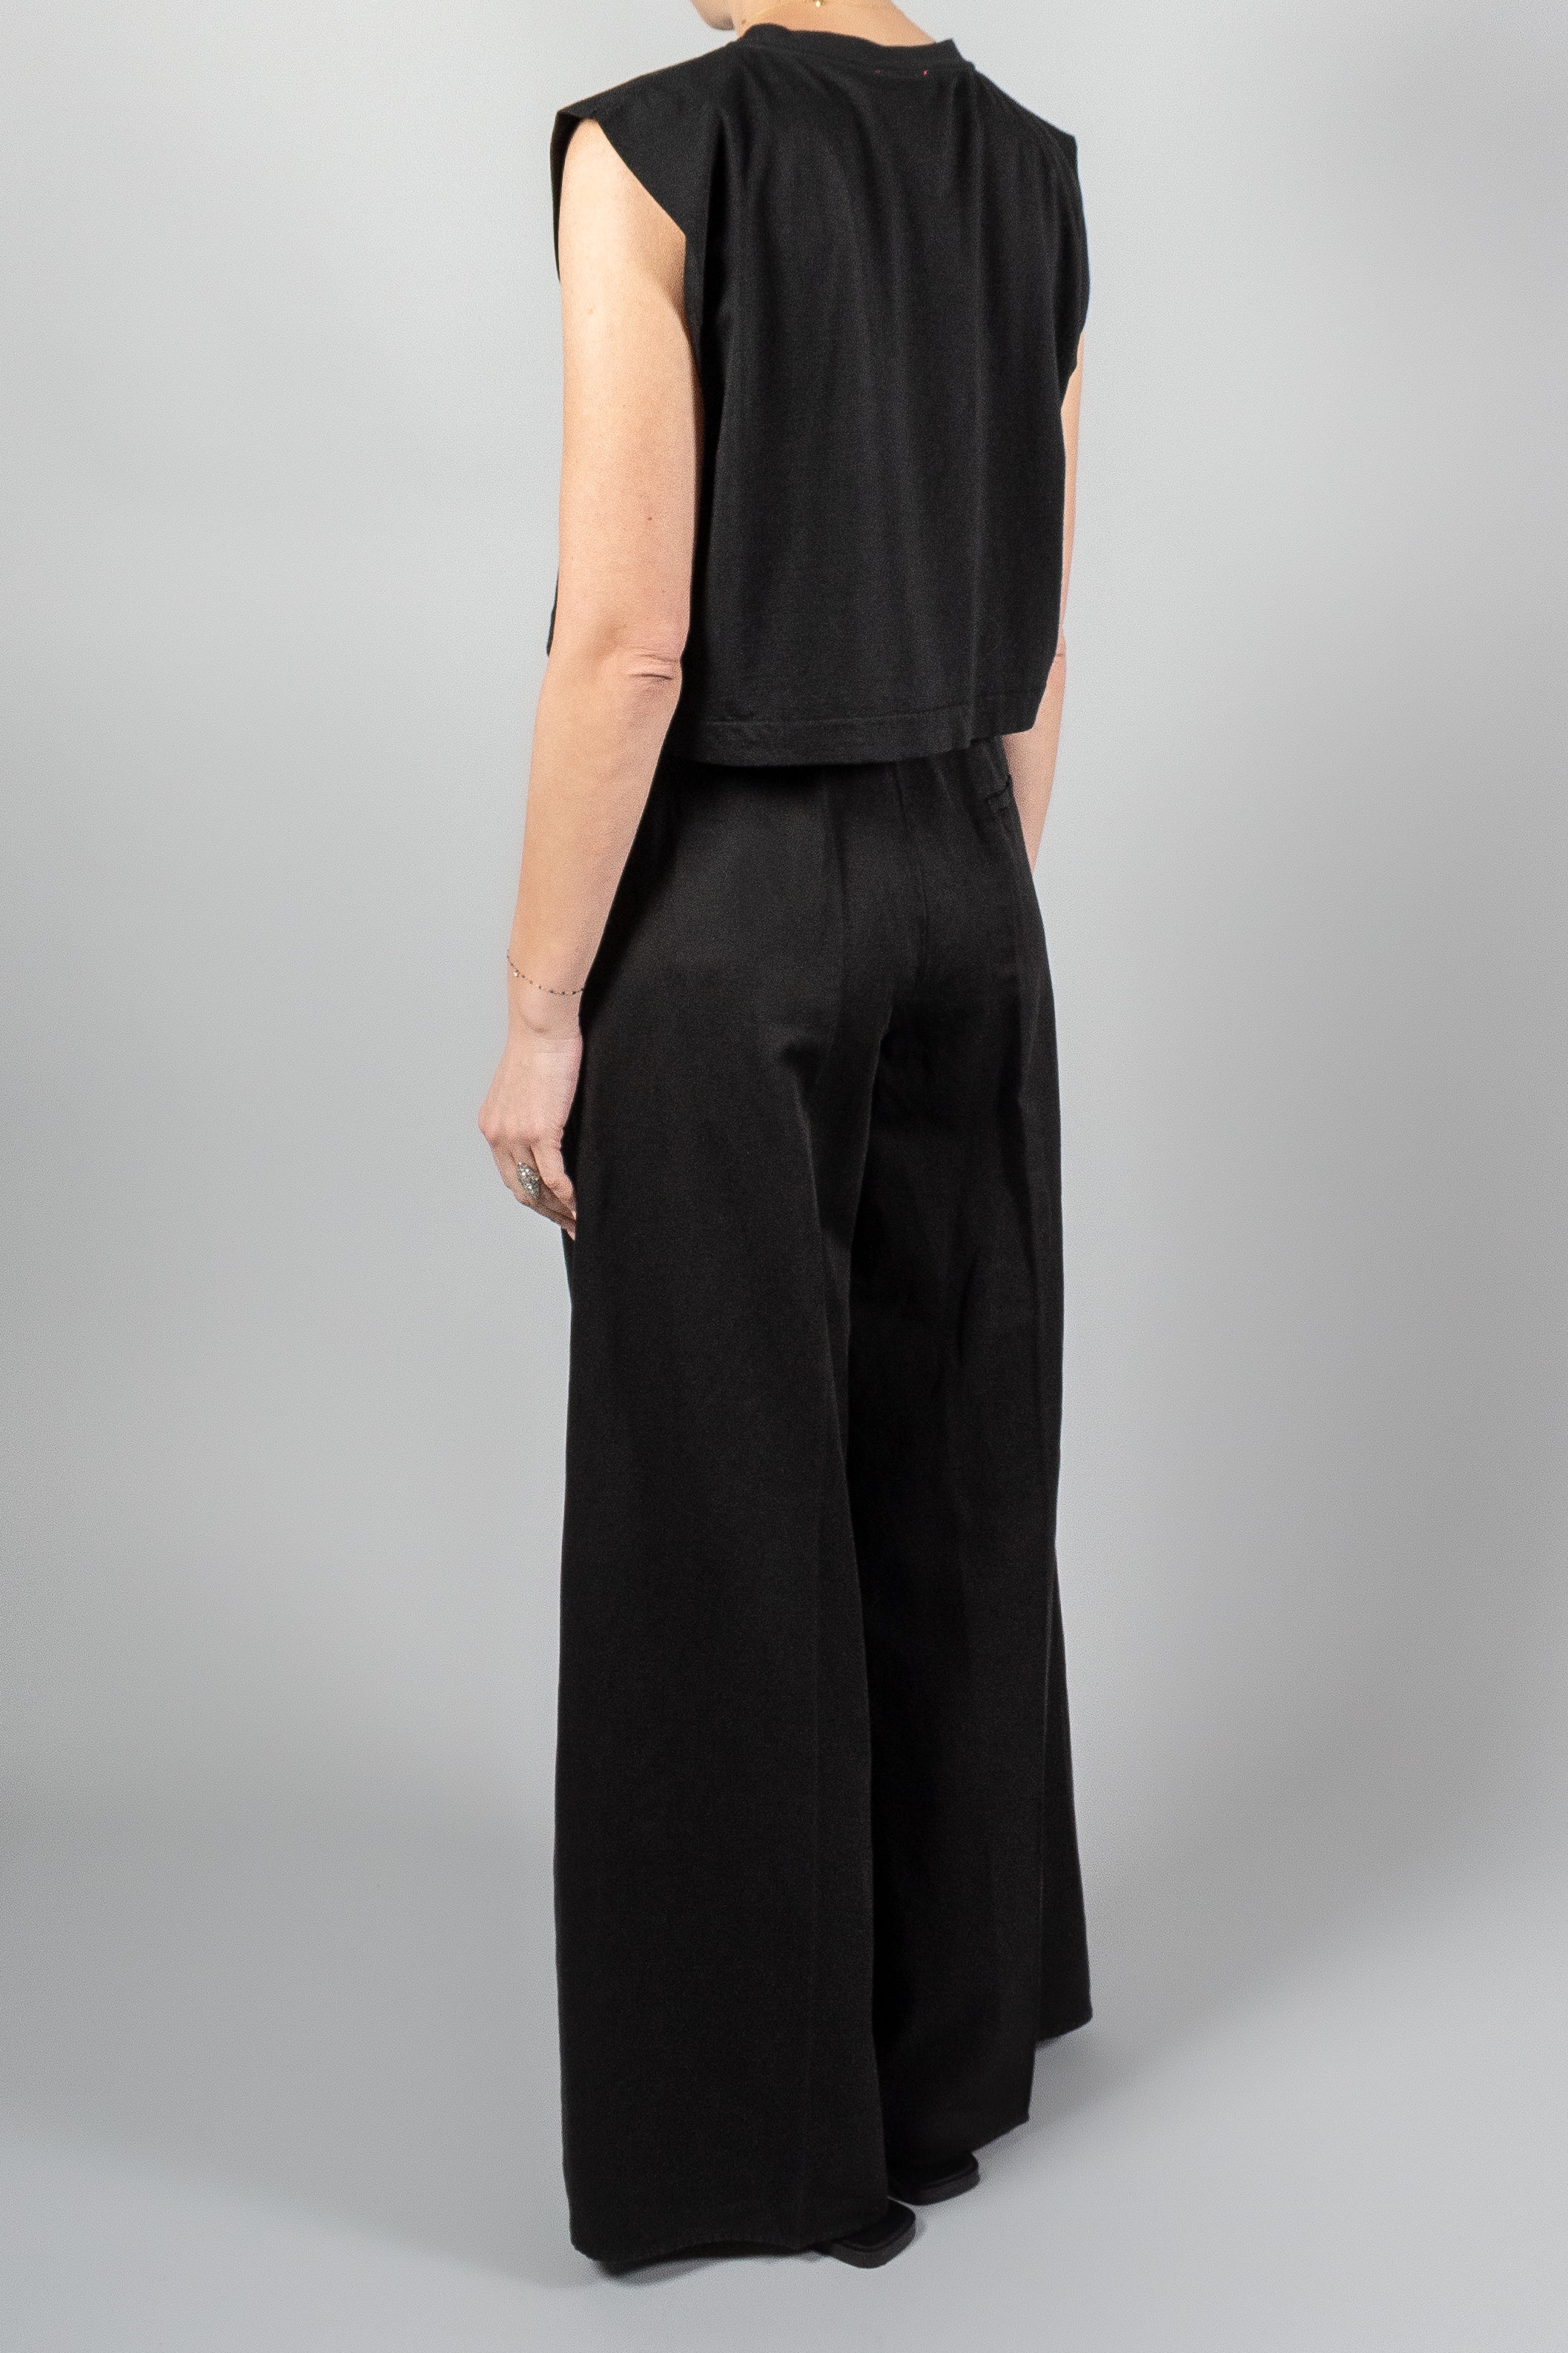 Forte Forte Chic Palazzo Pants-Pants and Shorts-Misch-Boutique-Vancouver-Canada-misch.ca